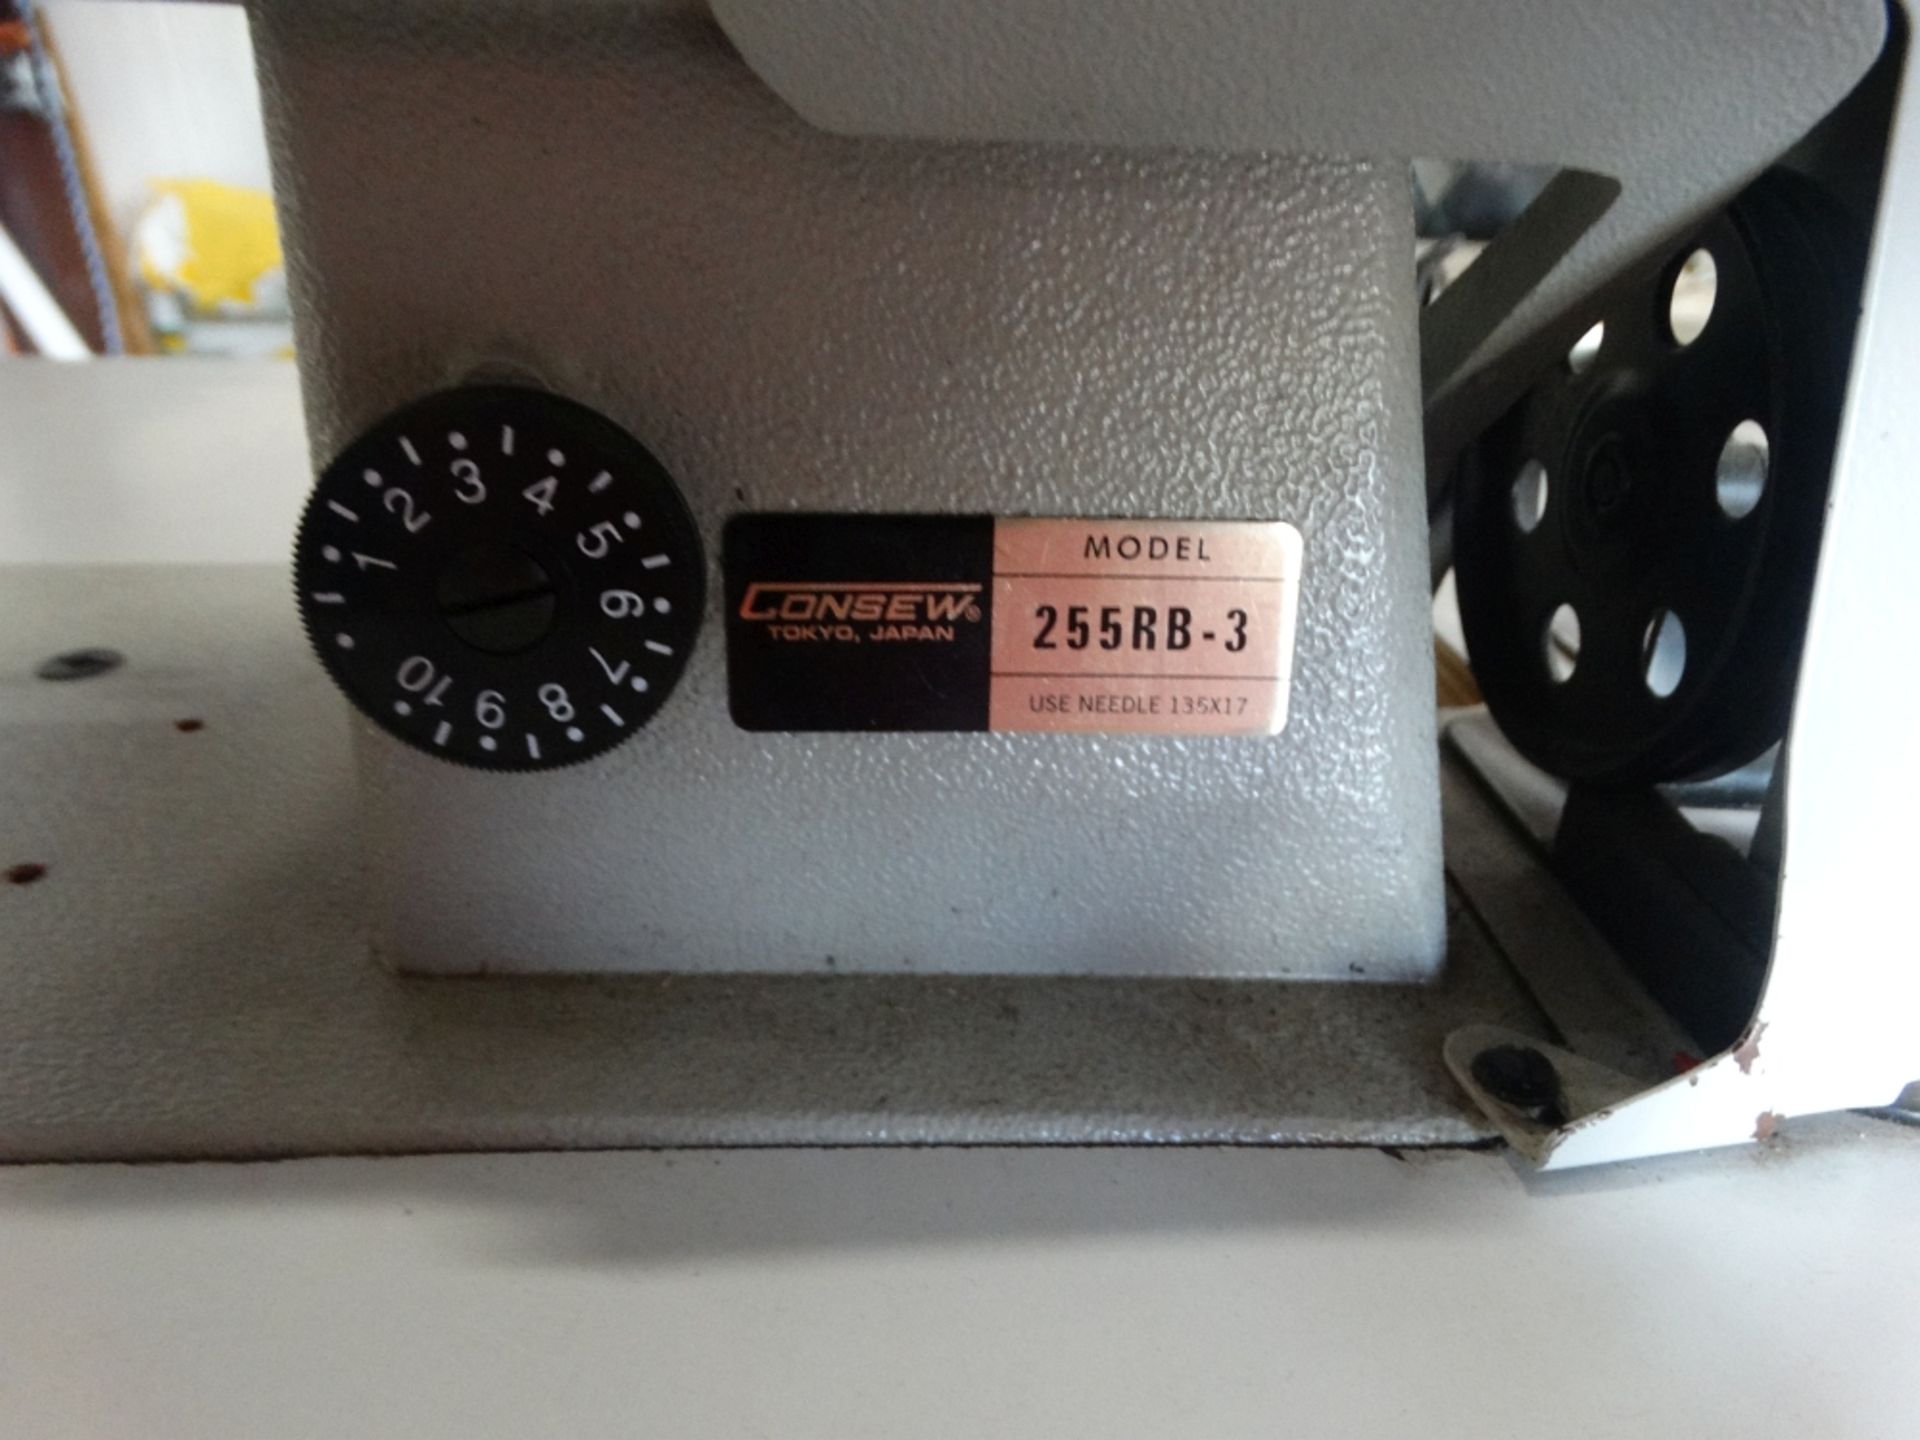 Consew - 255RB-2 Industrial Sewing Machine - Image 2 of 2